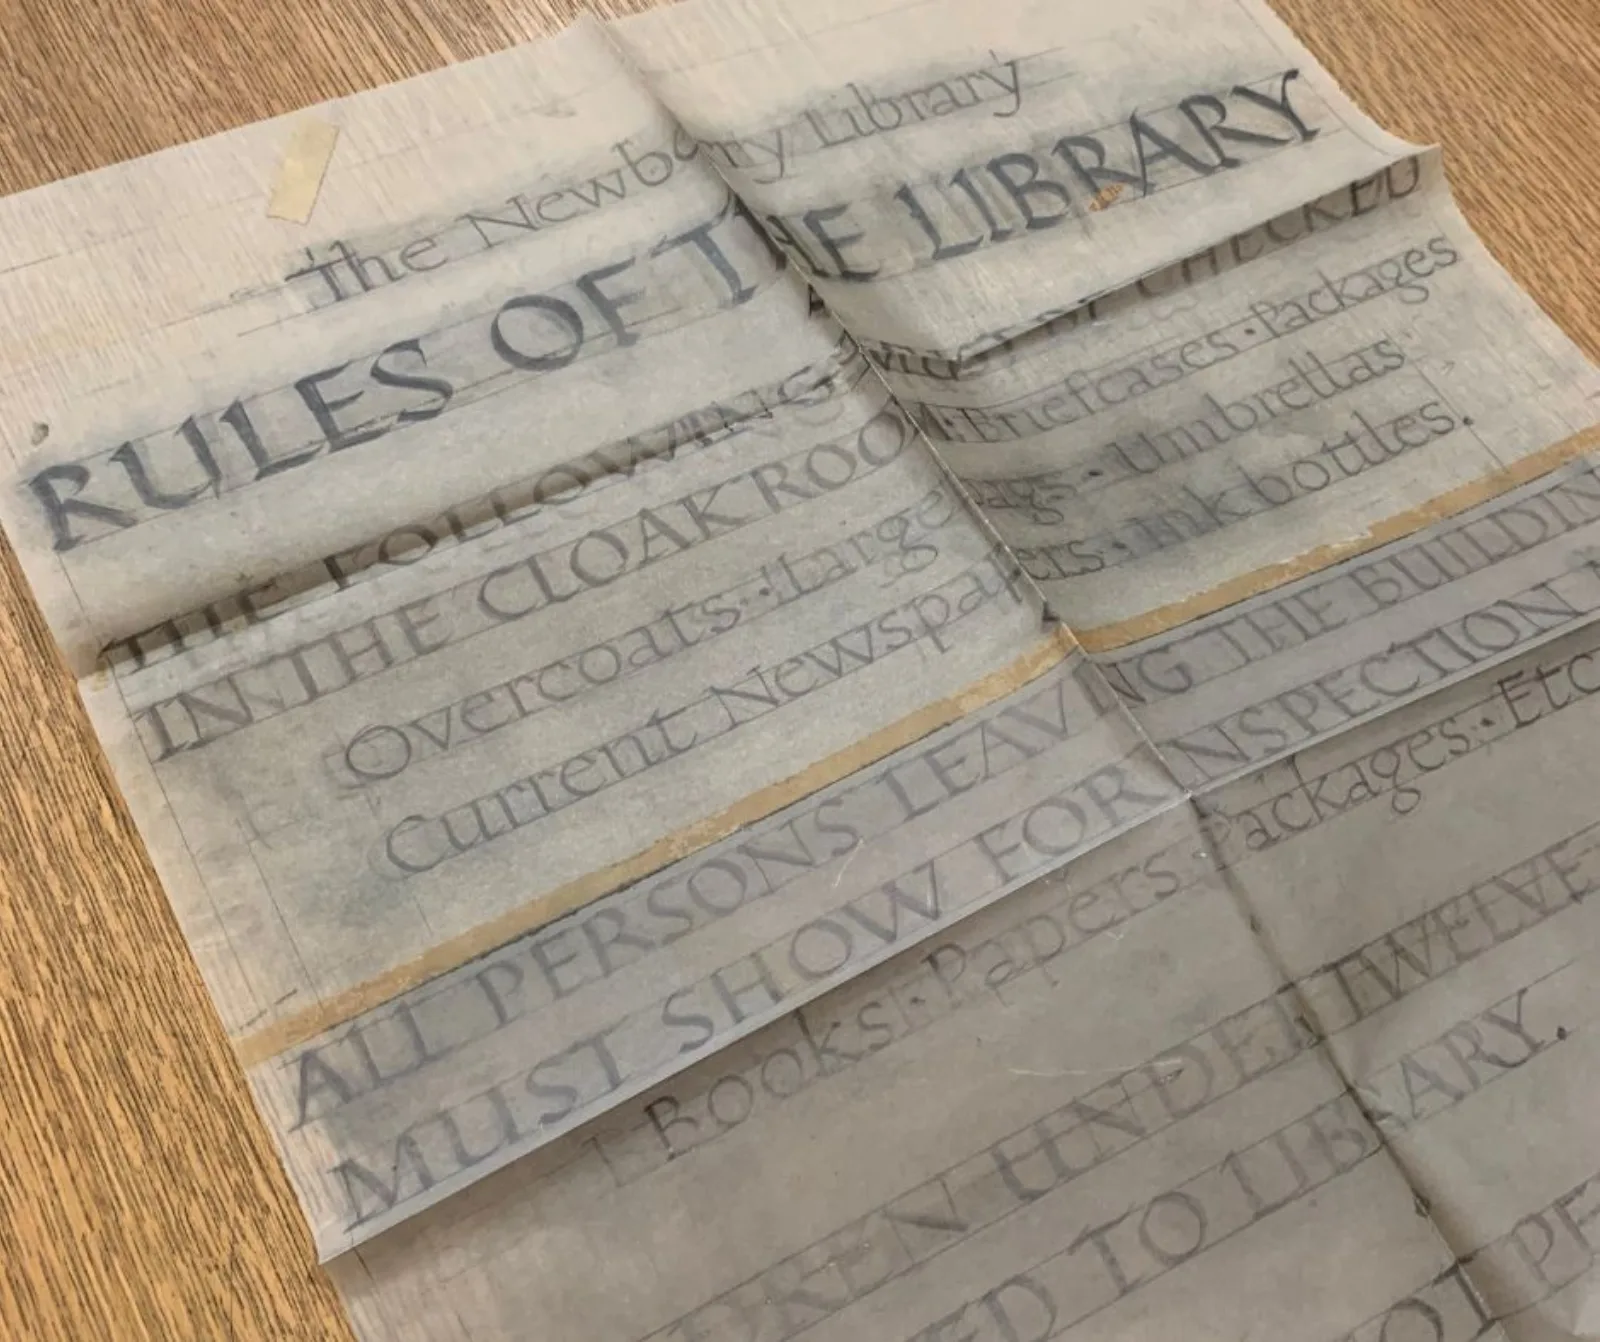 Hayes’s mockup of his “Rules of the Library” sign is done in pencil and on tracing paper.